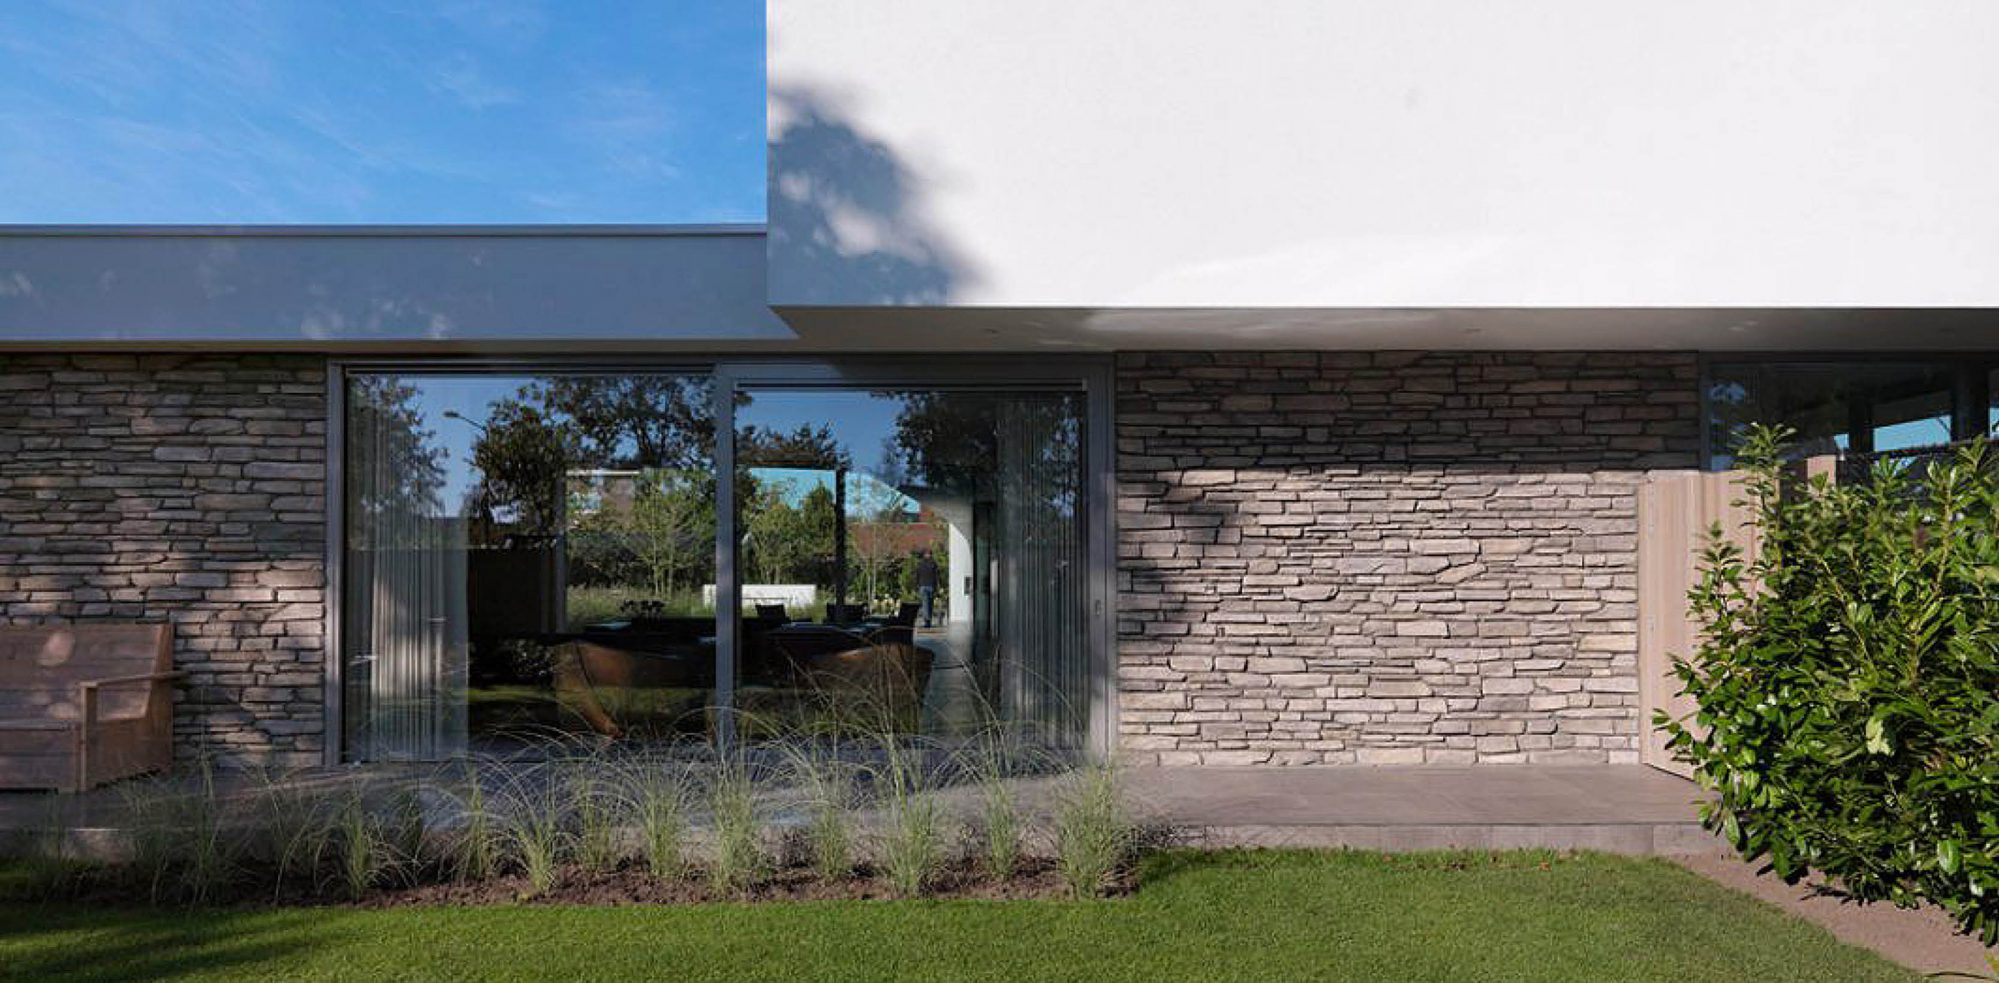 Contrast between glass, stone and white plaster